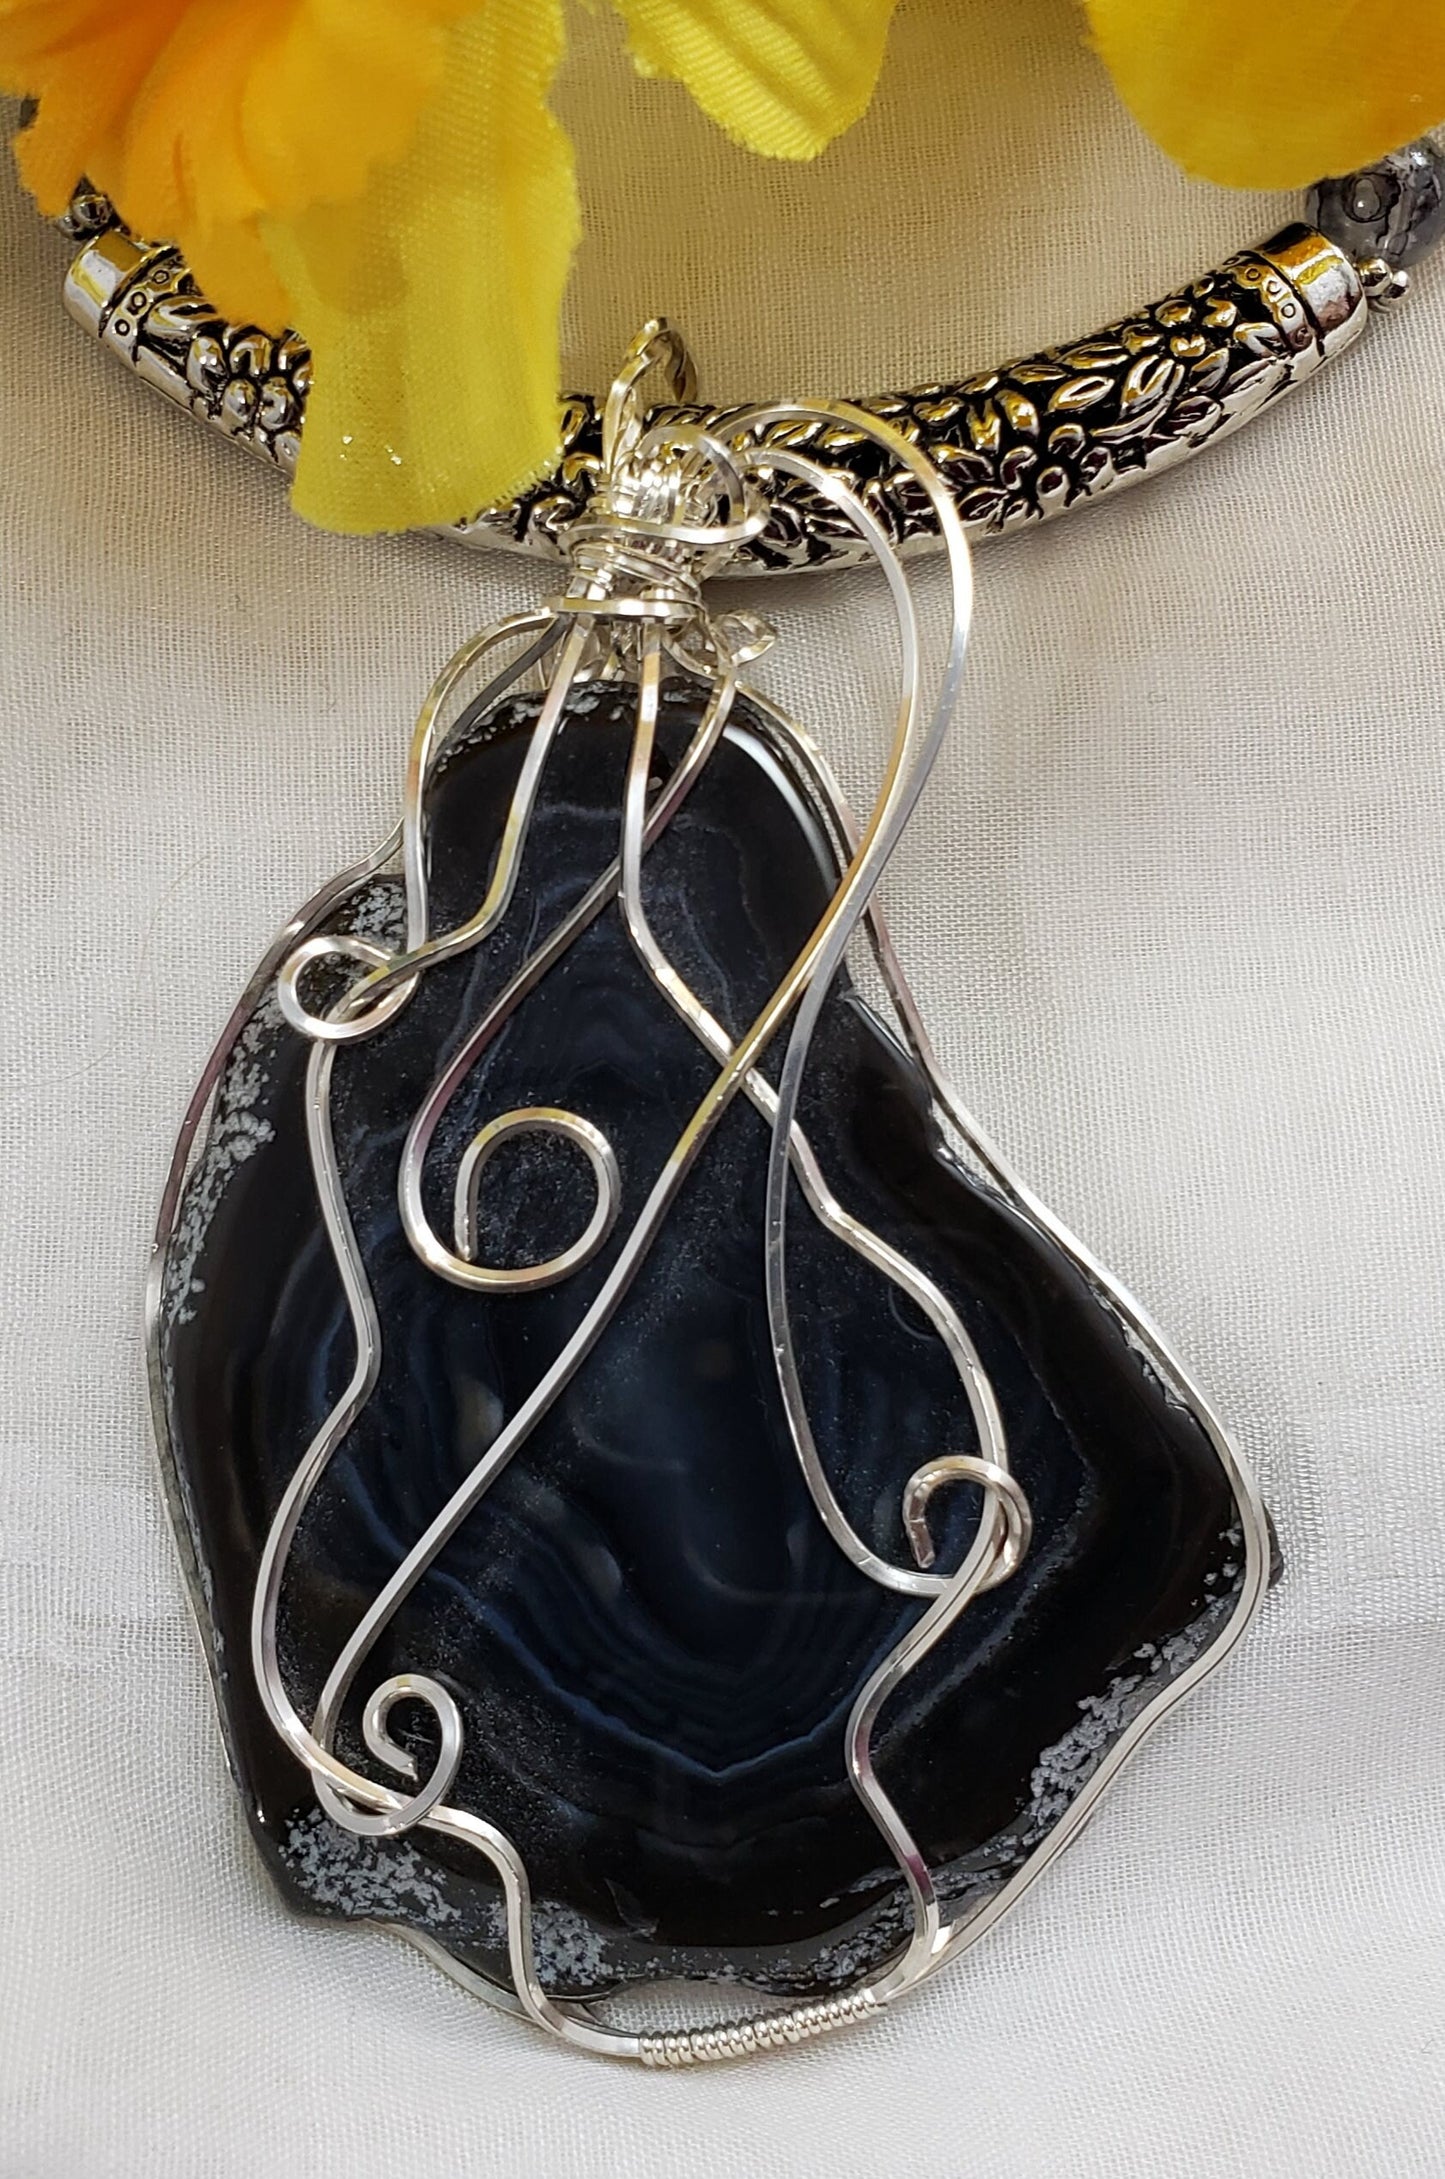 Wire Wrapped Black Veins Agate Pendant On Beaded Necklace